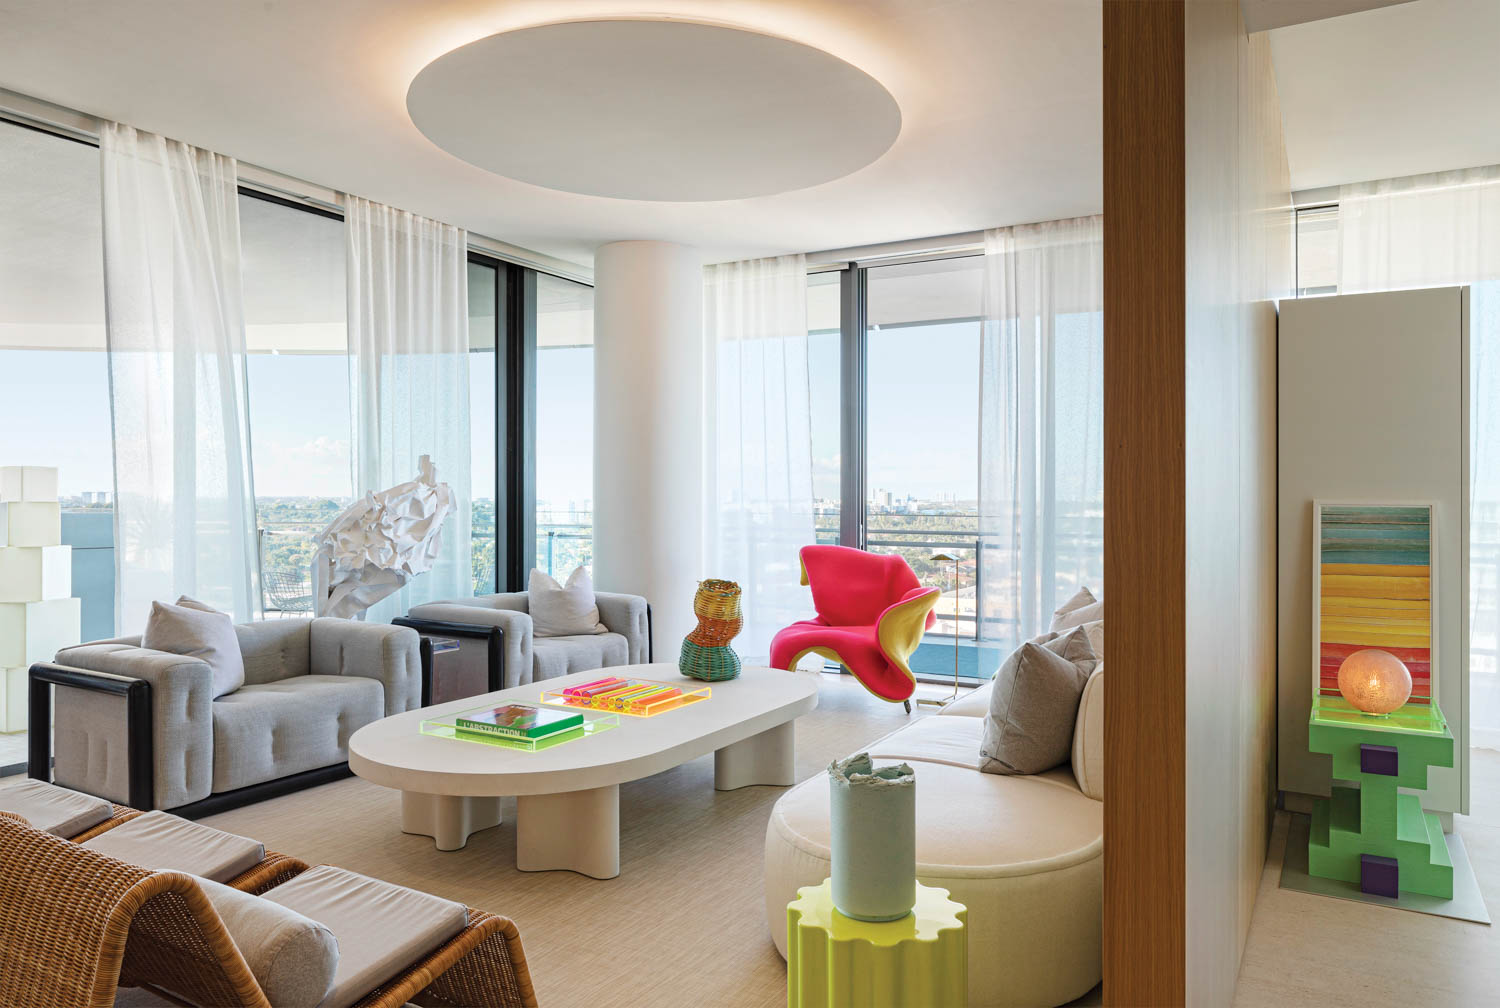 a built-in ceiling disc lights the living area of this home with neon accents throughout